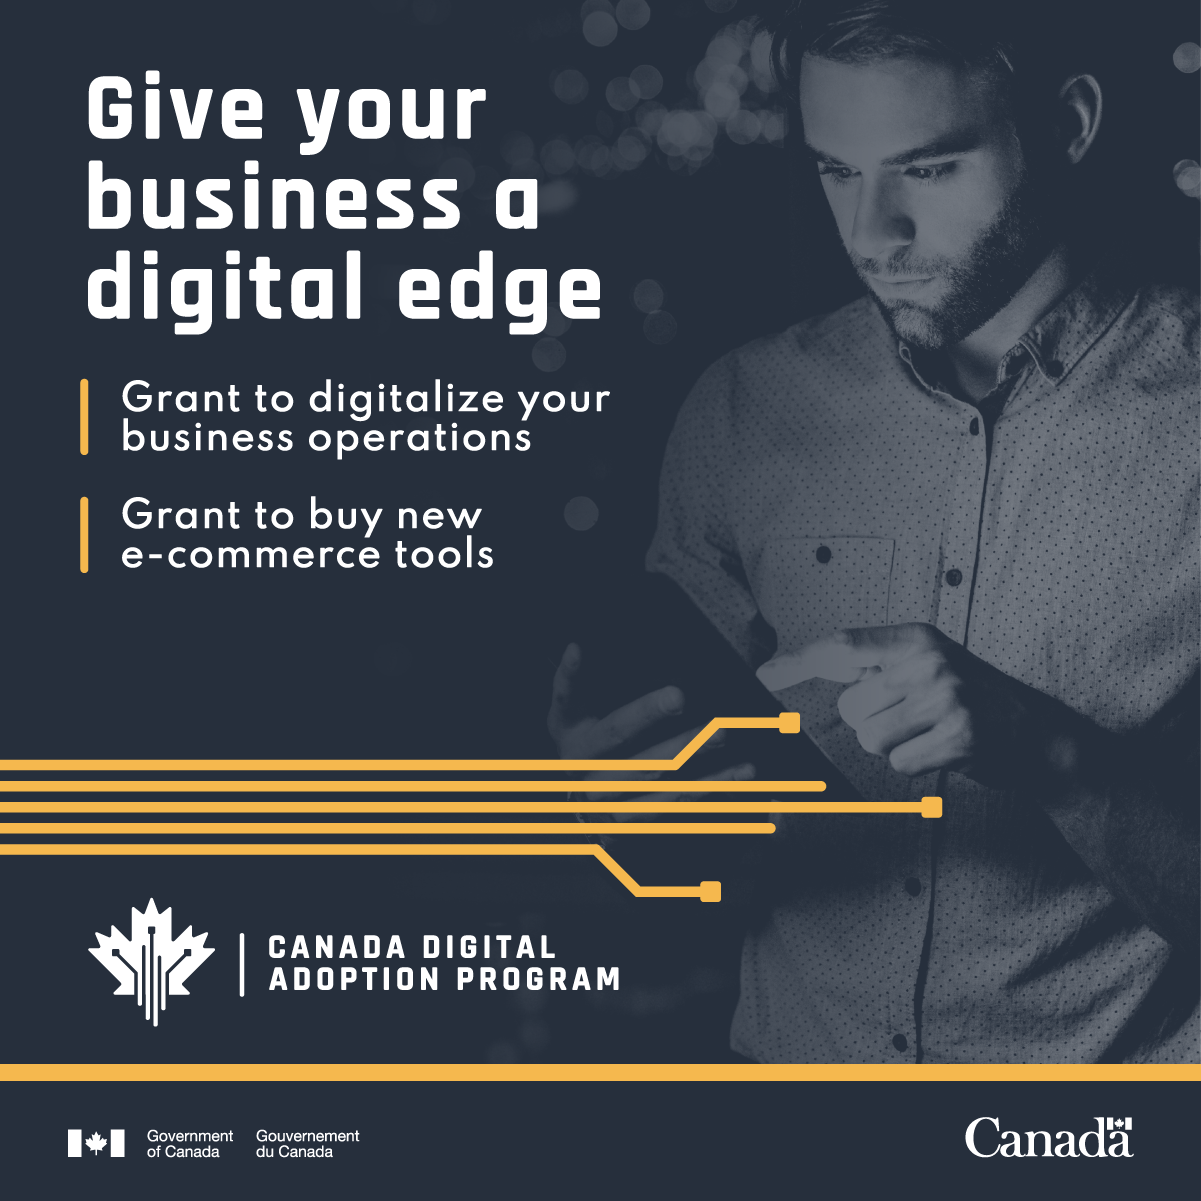 A man with facial hair wearing a button-down shirt using an iPad. With text: give your business a digital edge; grant to digitalize your business operations; grant to buy new e-commerce tools; Canada Digital Adoption Program. 